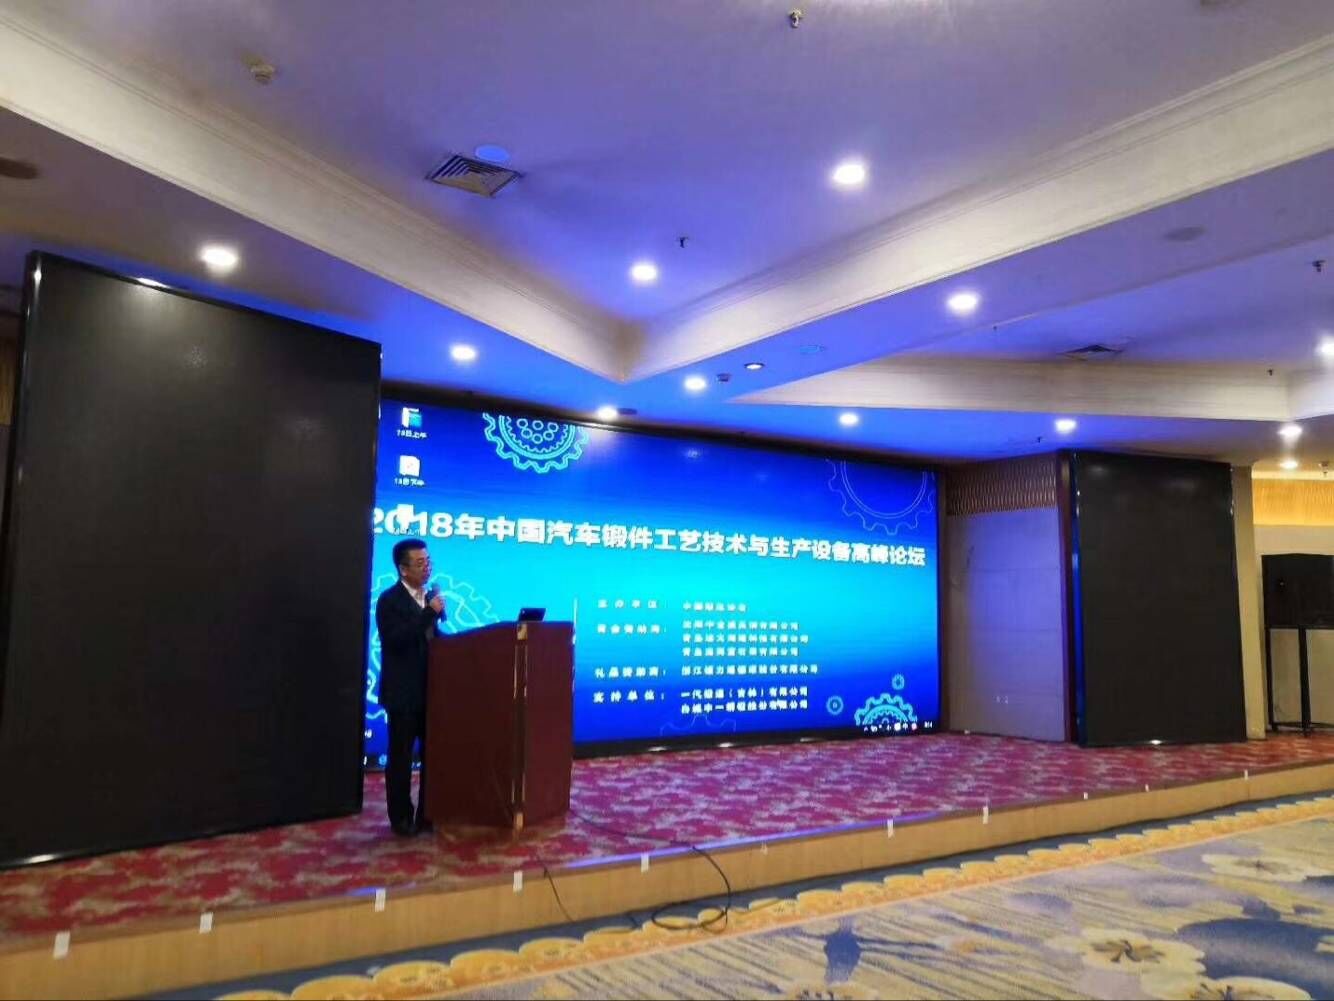 New Wichita participated in the 2018 China Automotive Forgings Technology and Production Equipment Summit forum